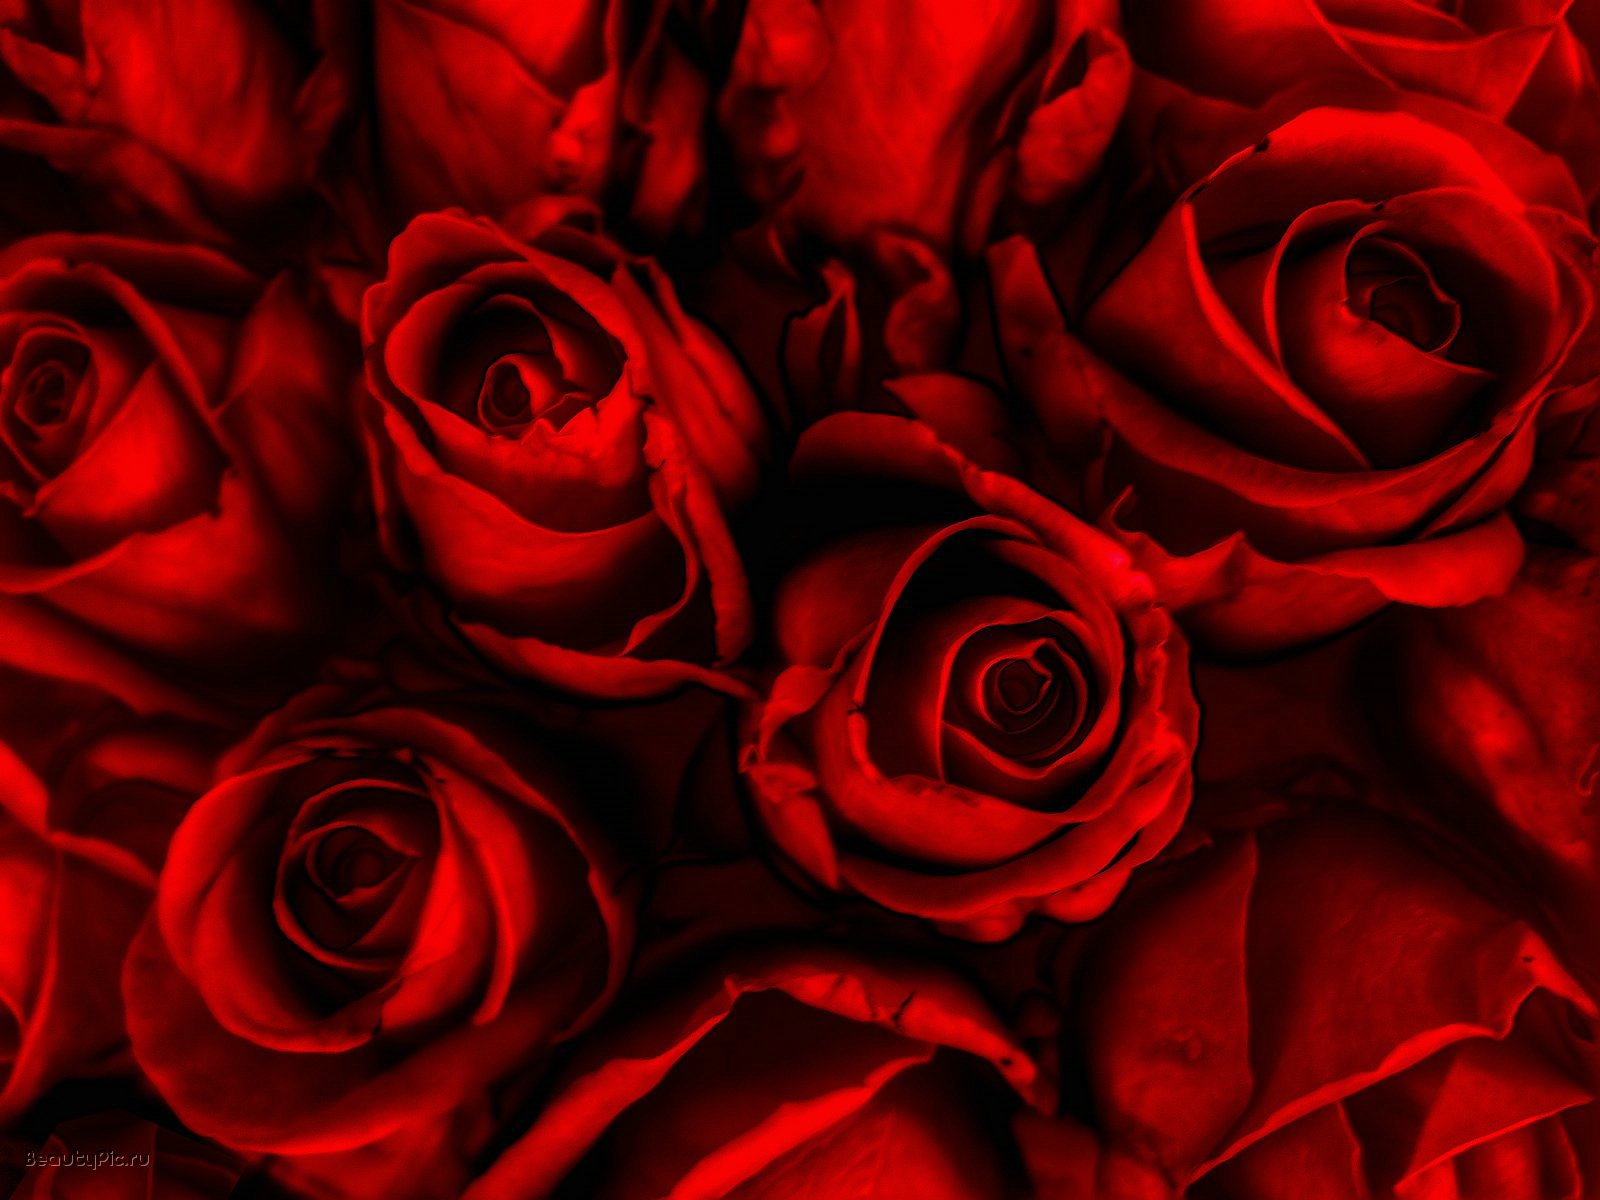 Red Roses Wallpapers HD A30